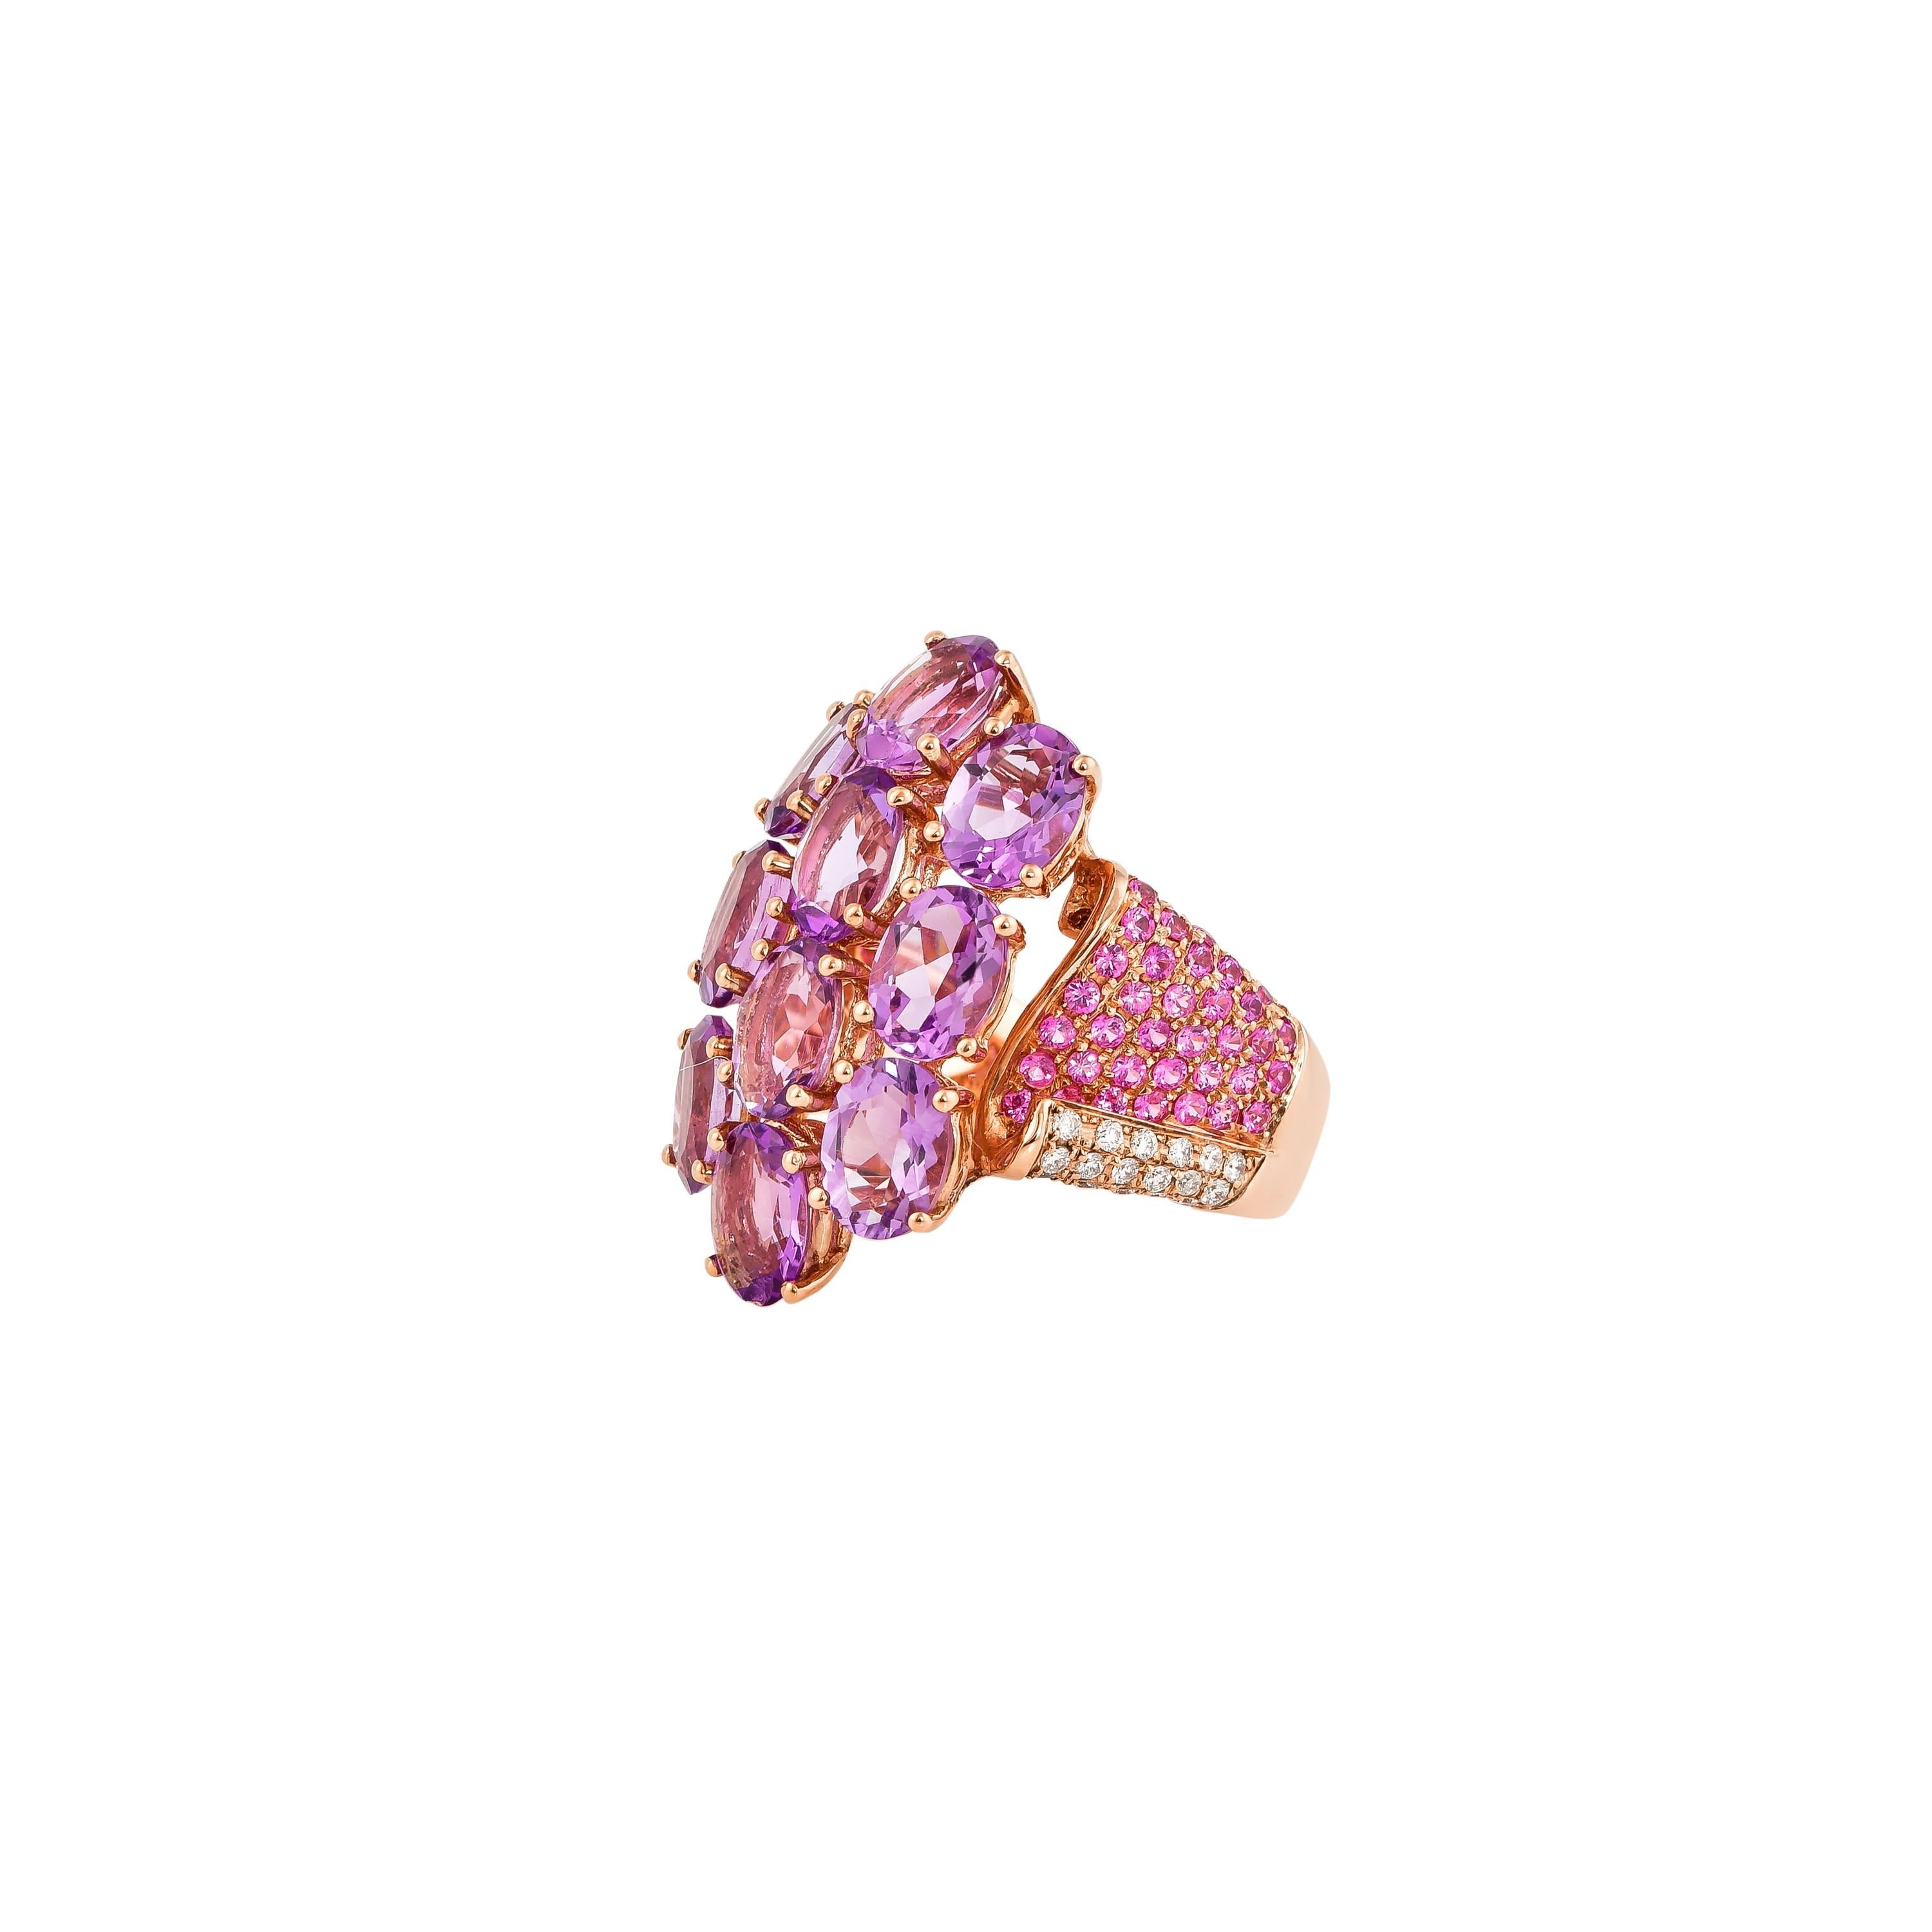 Contemporary 6.5 Carat Amethyst, Pink Sapphire and Diamond Ring in 14 Karat Rose Gold